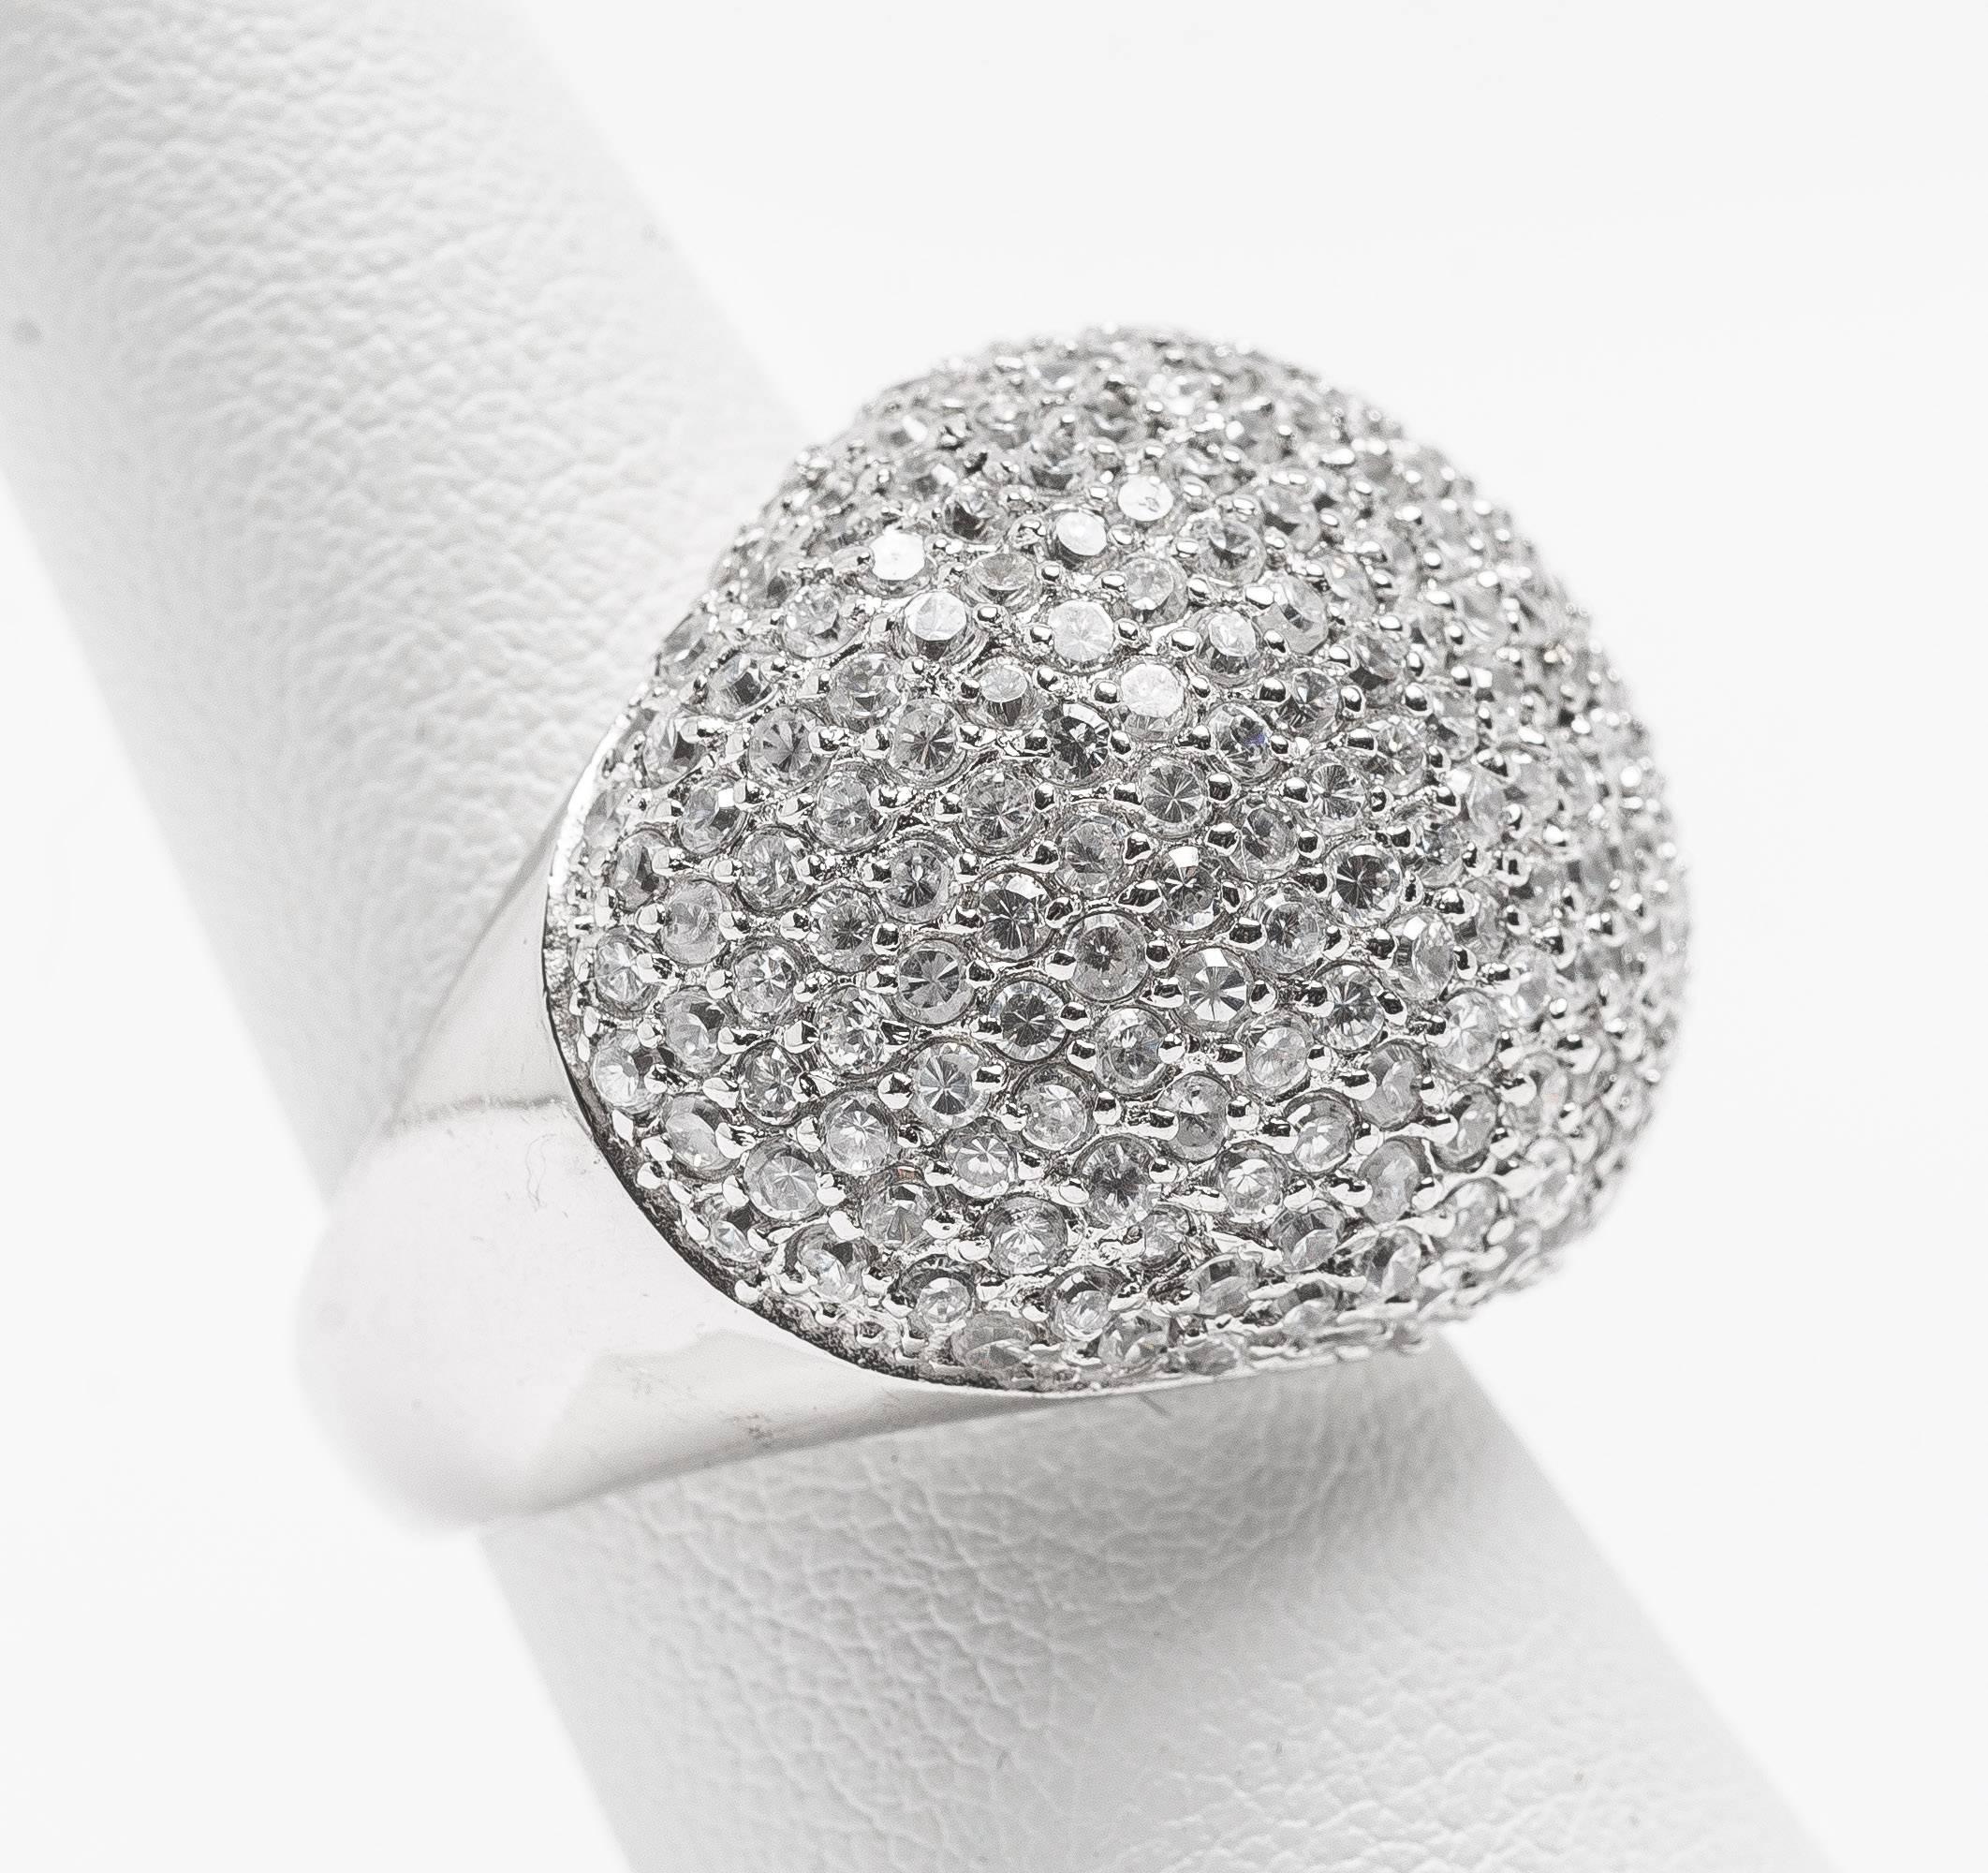 Pave faux diamond cocktail ring made with micro set cubic zircons set in rhodium sterling. The top measures about 1'' around. Simple and elegant.